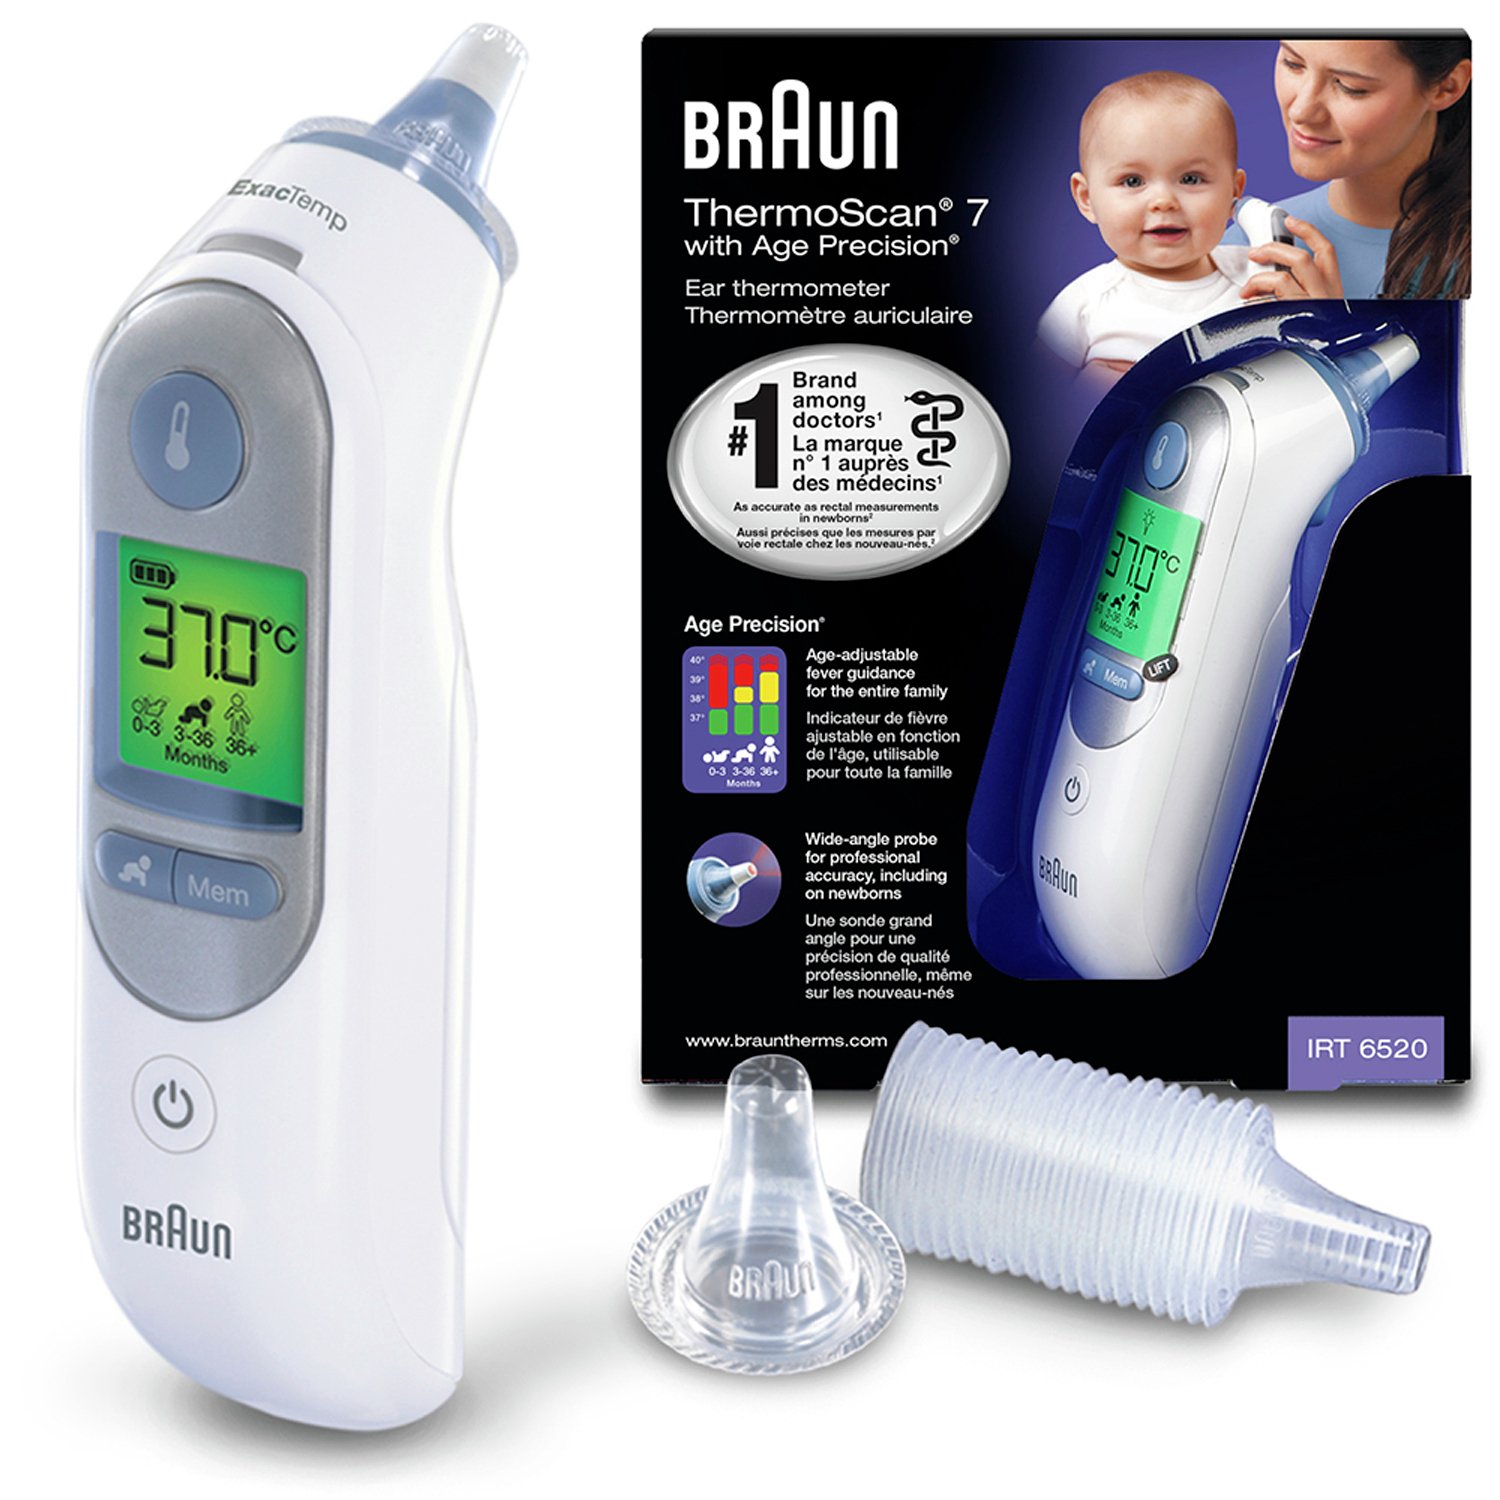 Braun ThermoScan¬Æ 7 Ear Thermometer with Age Precision¬Æ